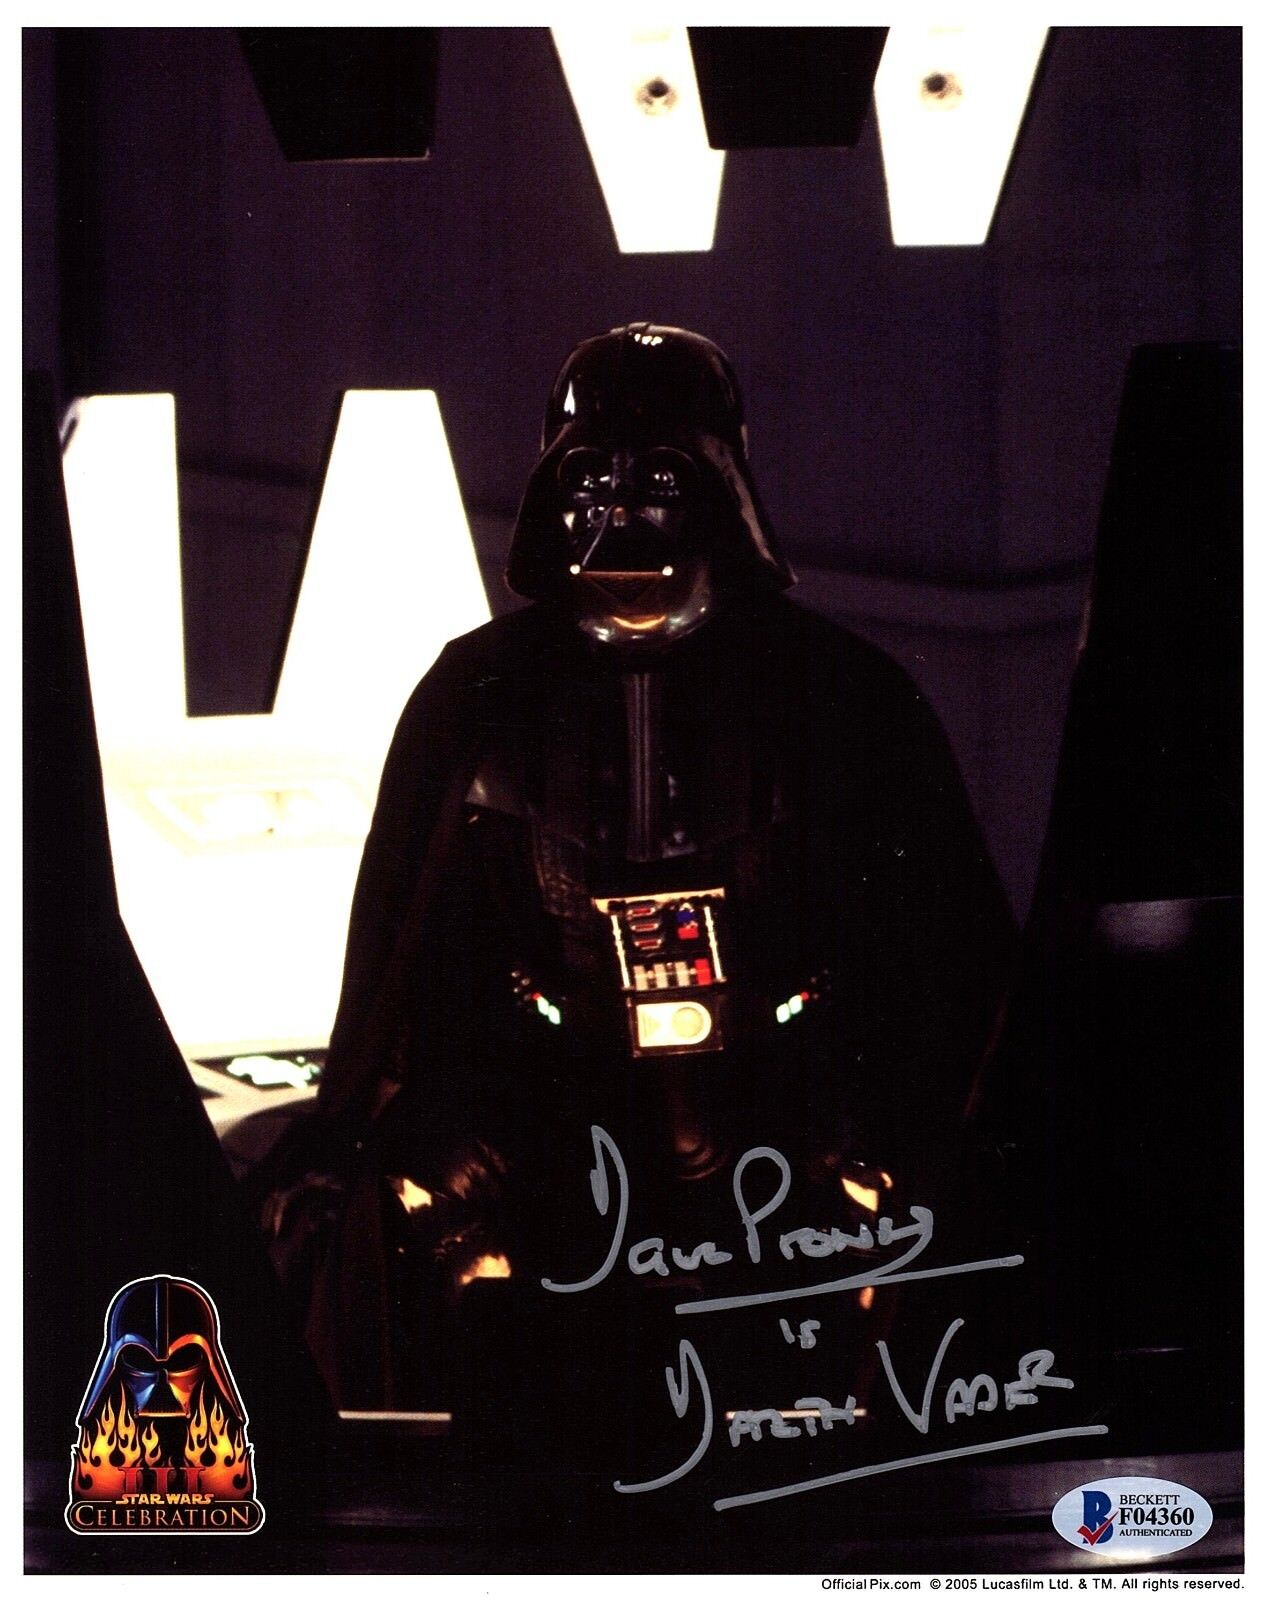 DAVE PROWSE Signed Darth Vader STAR WARS 8x10 Official Pix Photo Poster painting BECKETT #F04360